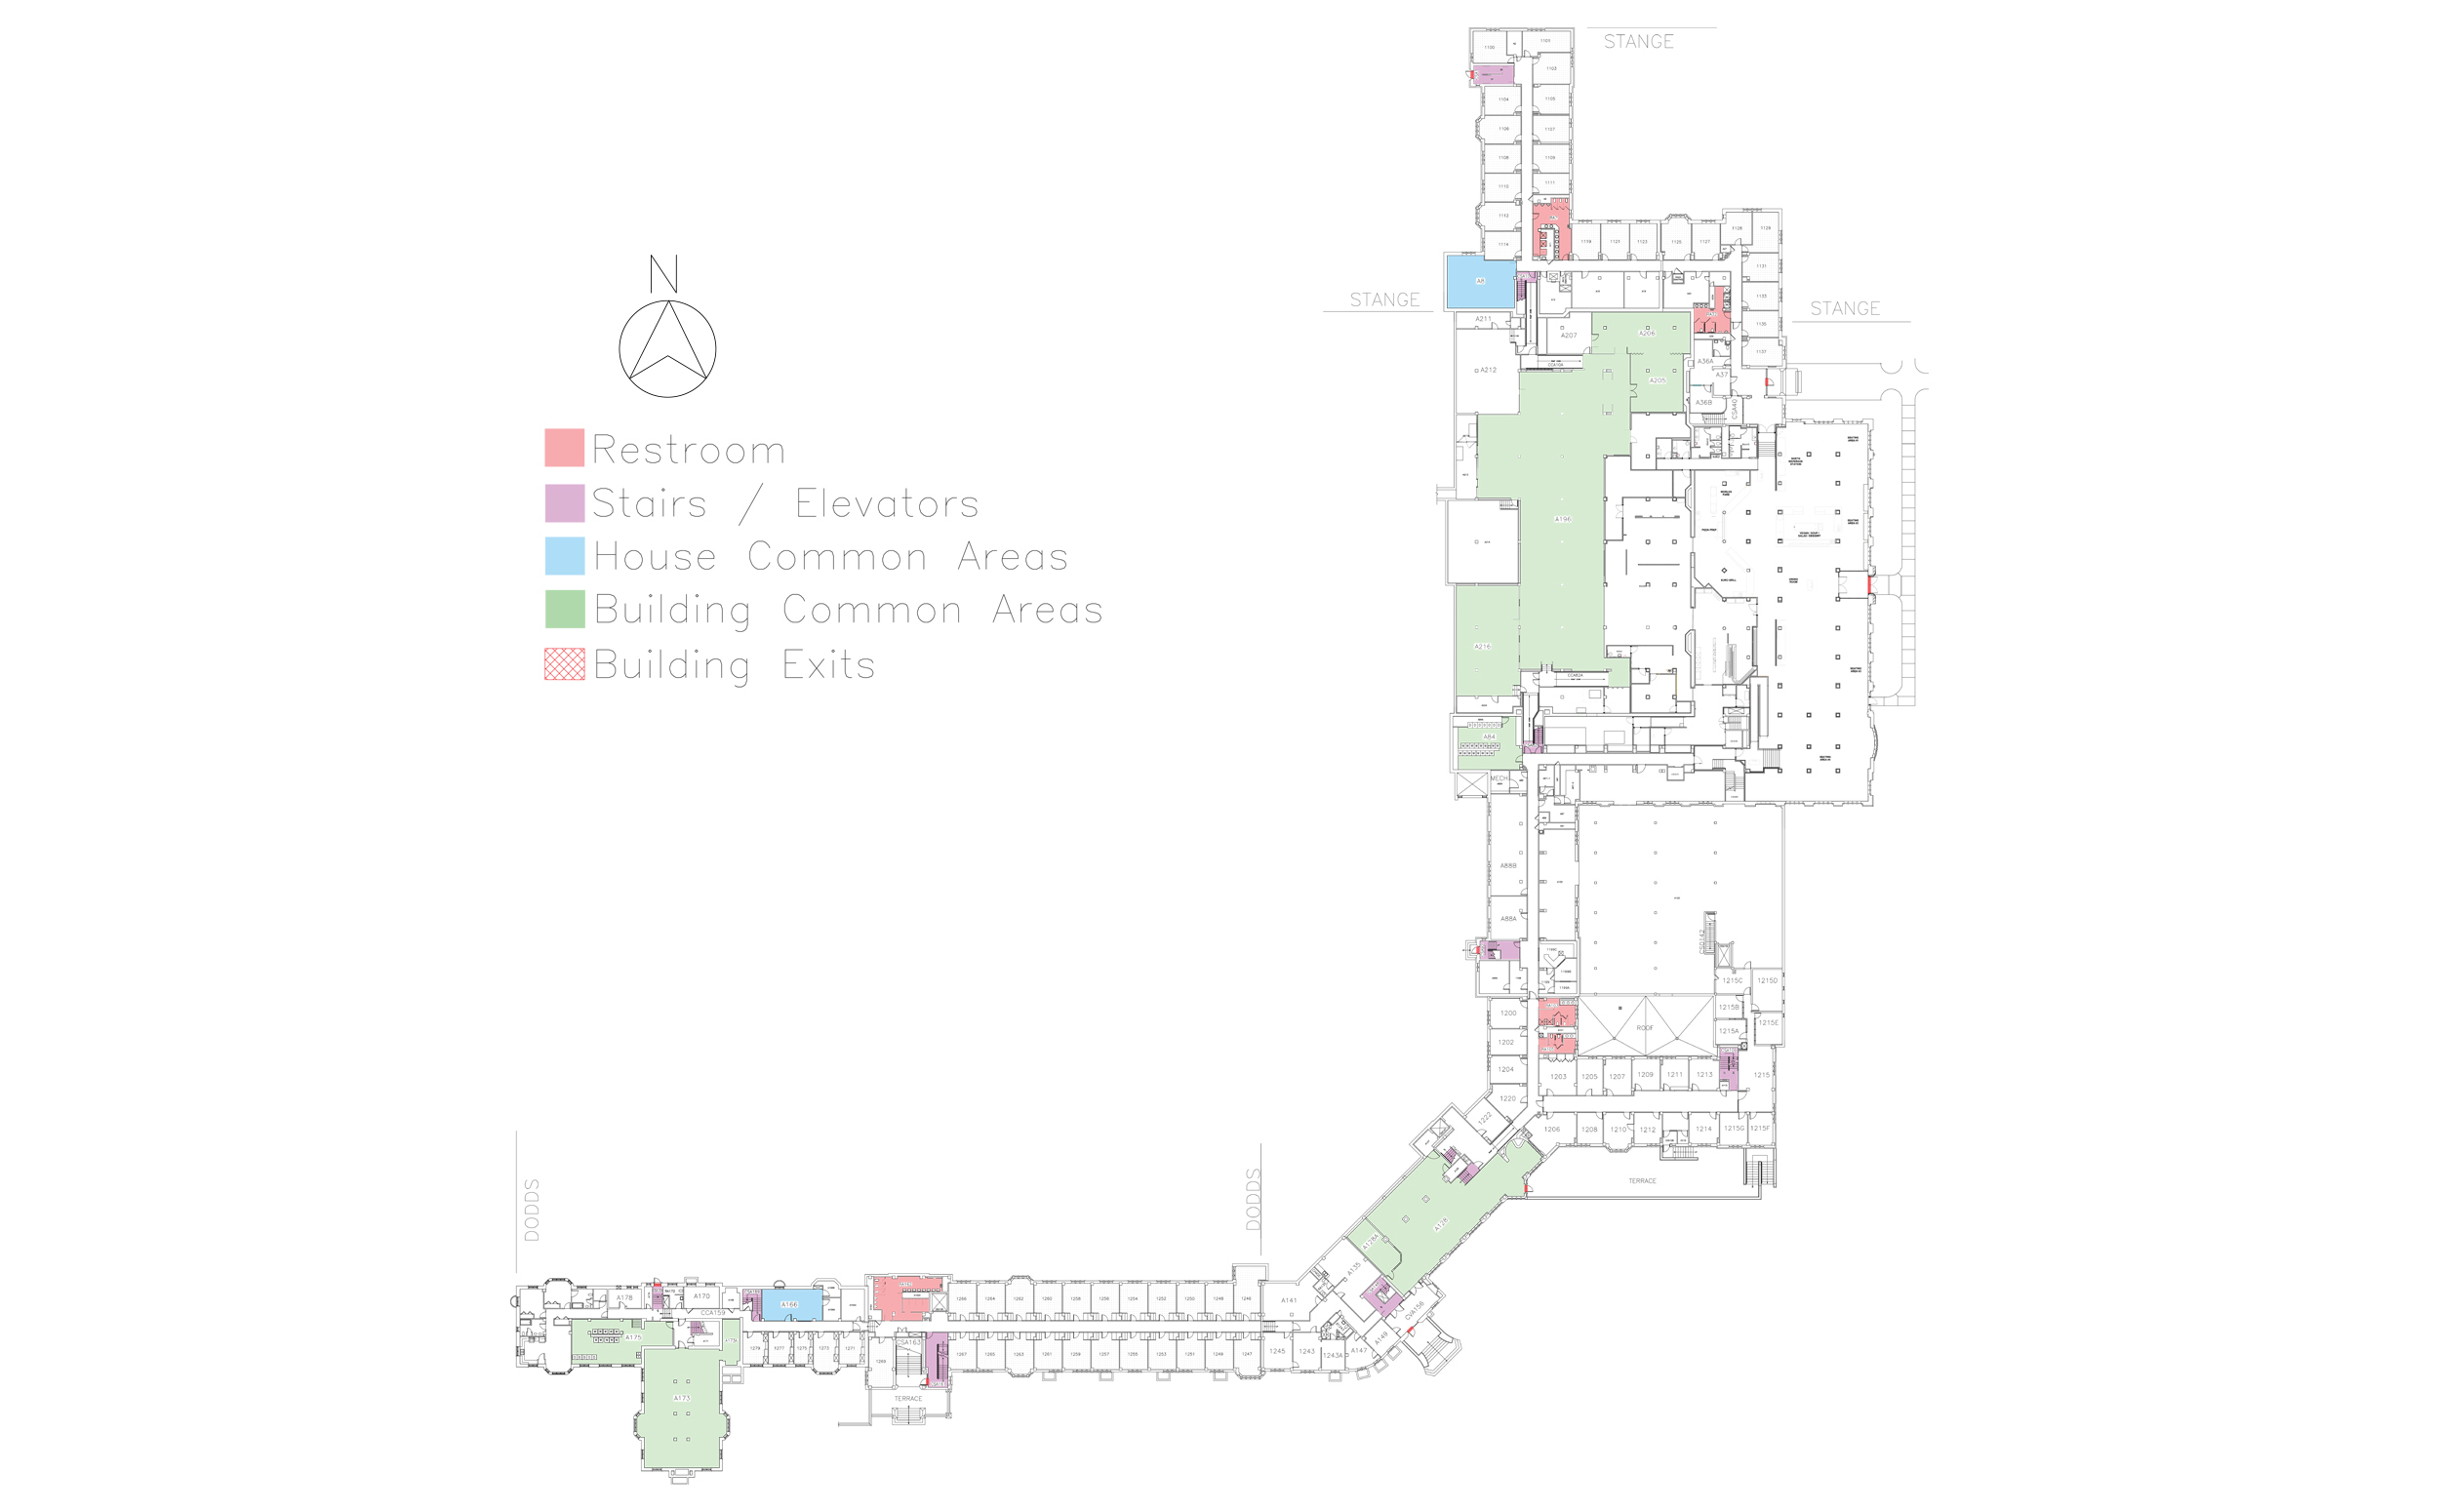 Floor plan showing house locations on the first floor of Friley Hall.